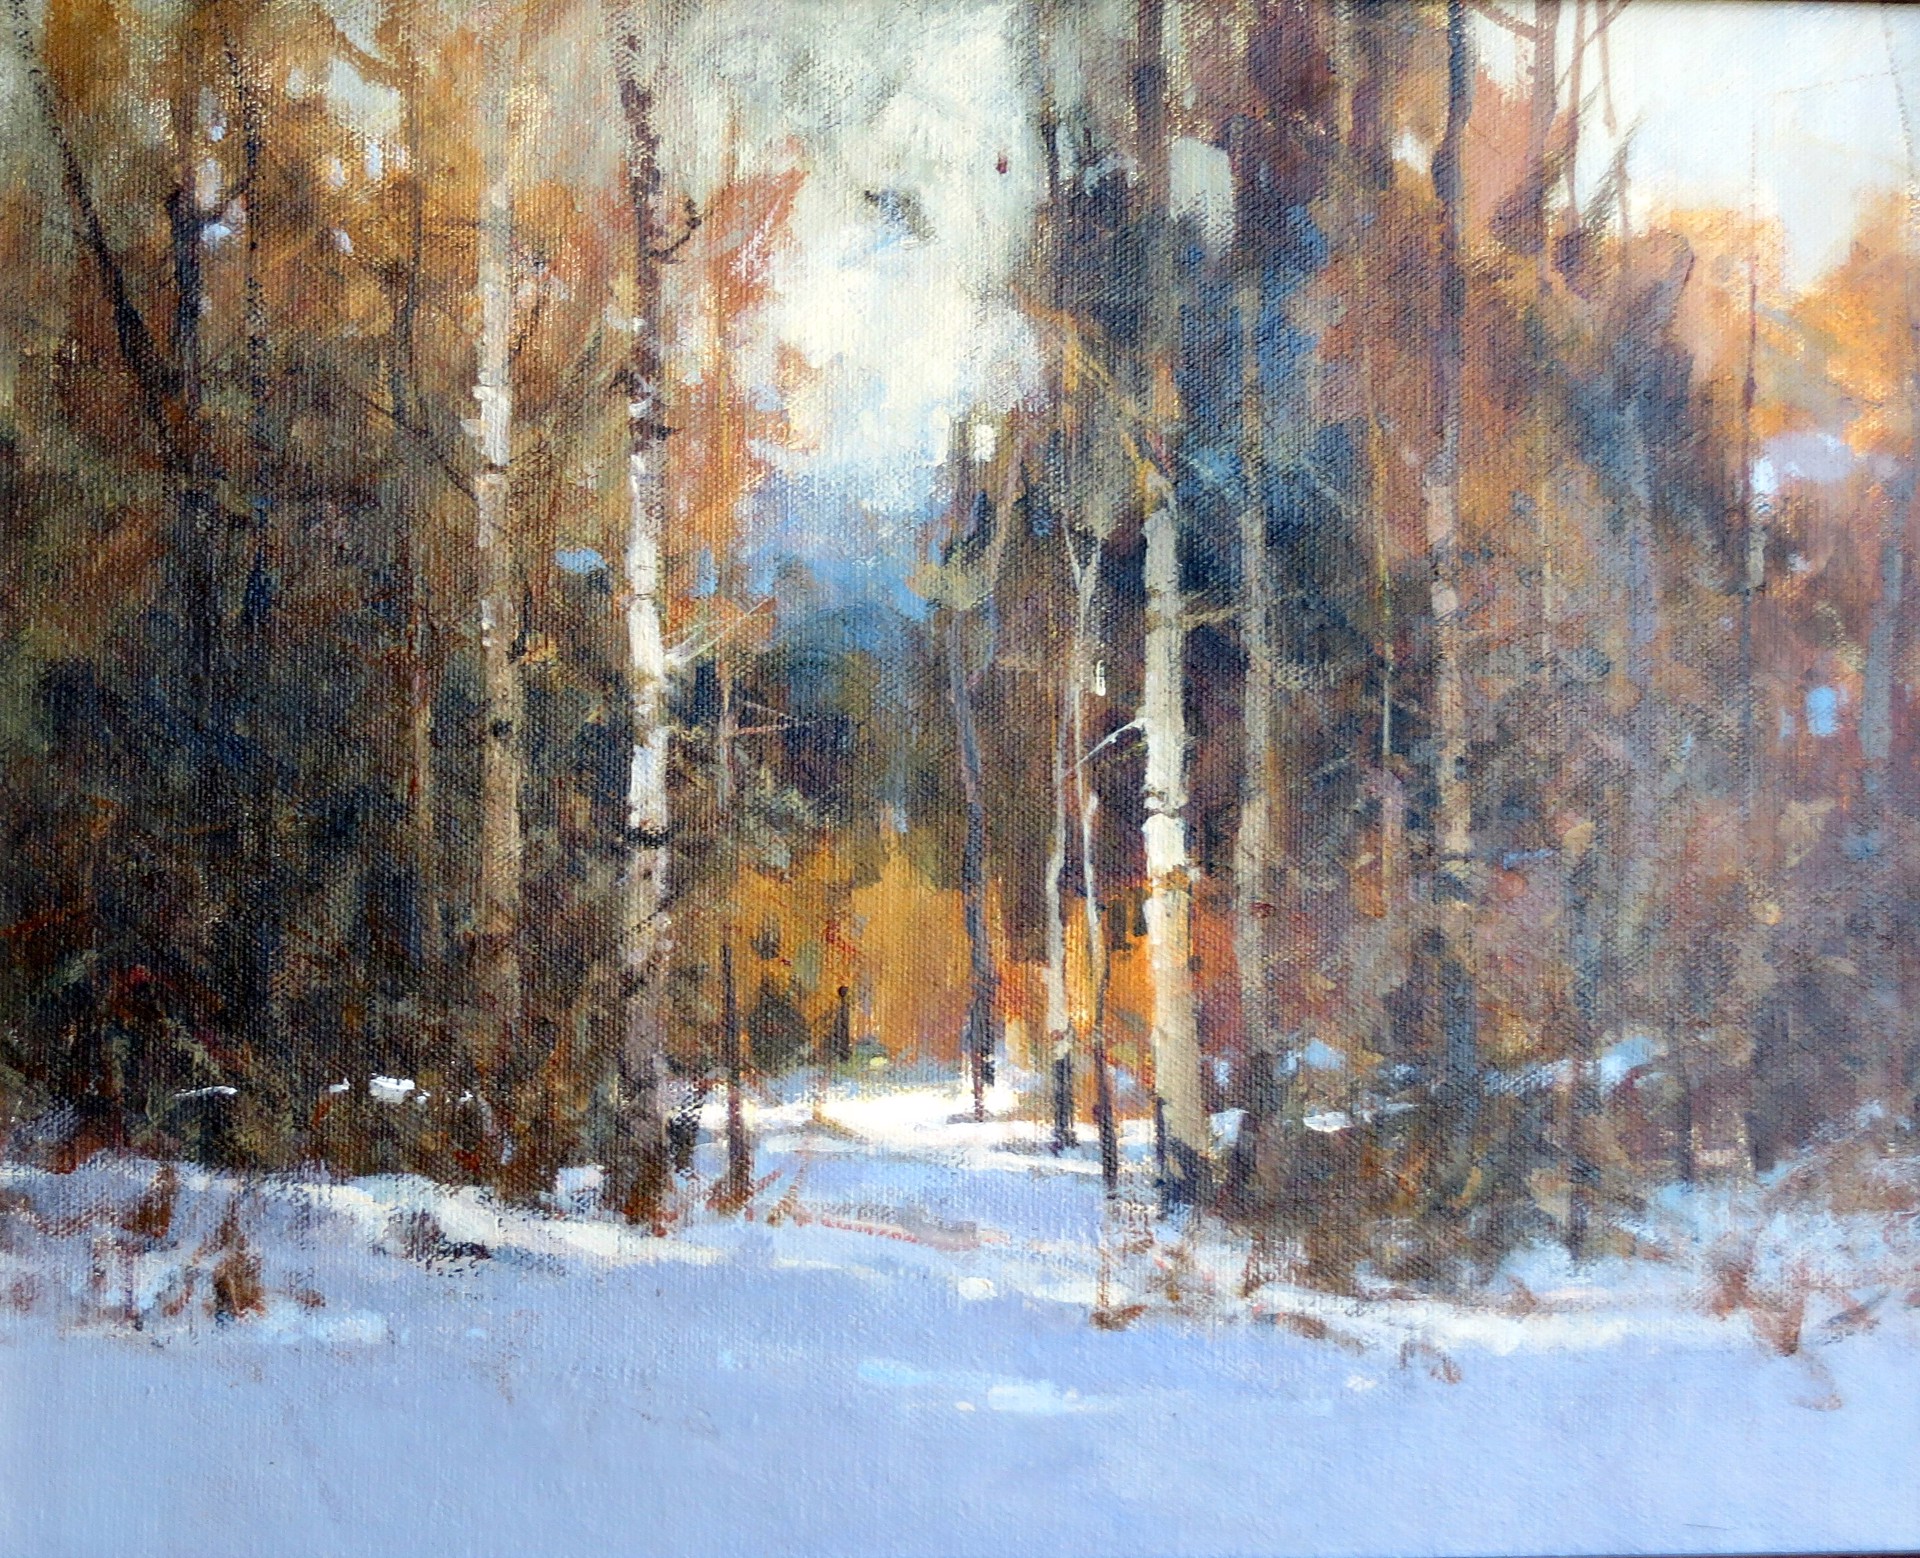 Early Snow by Marilyn Yates